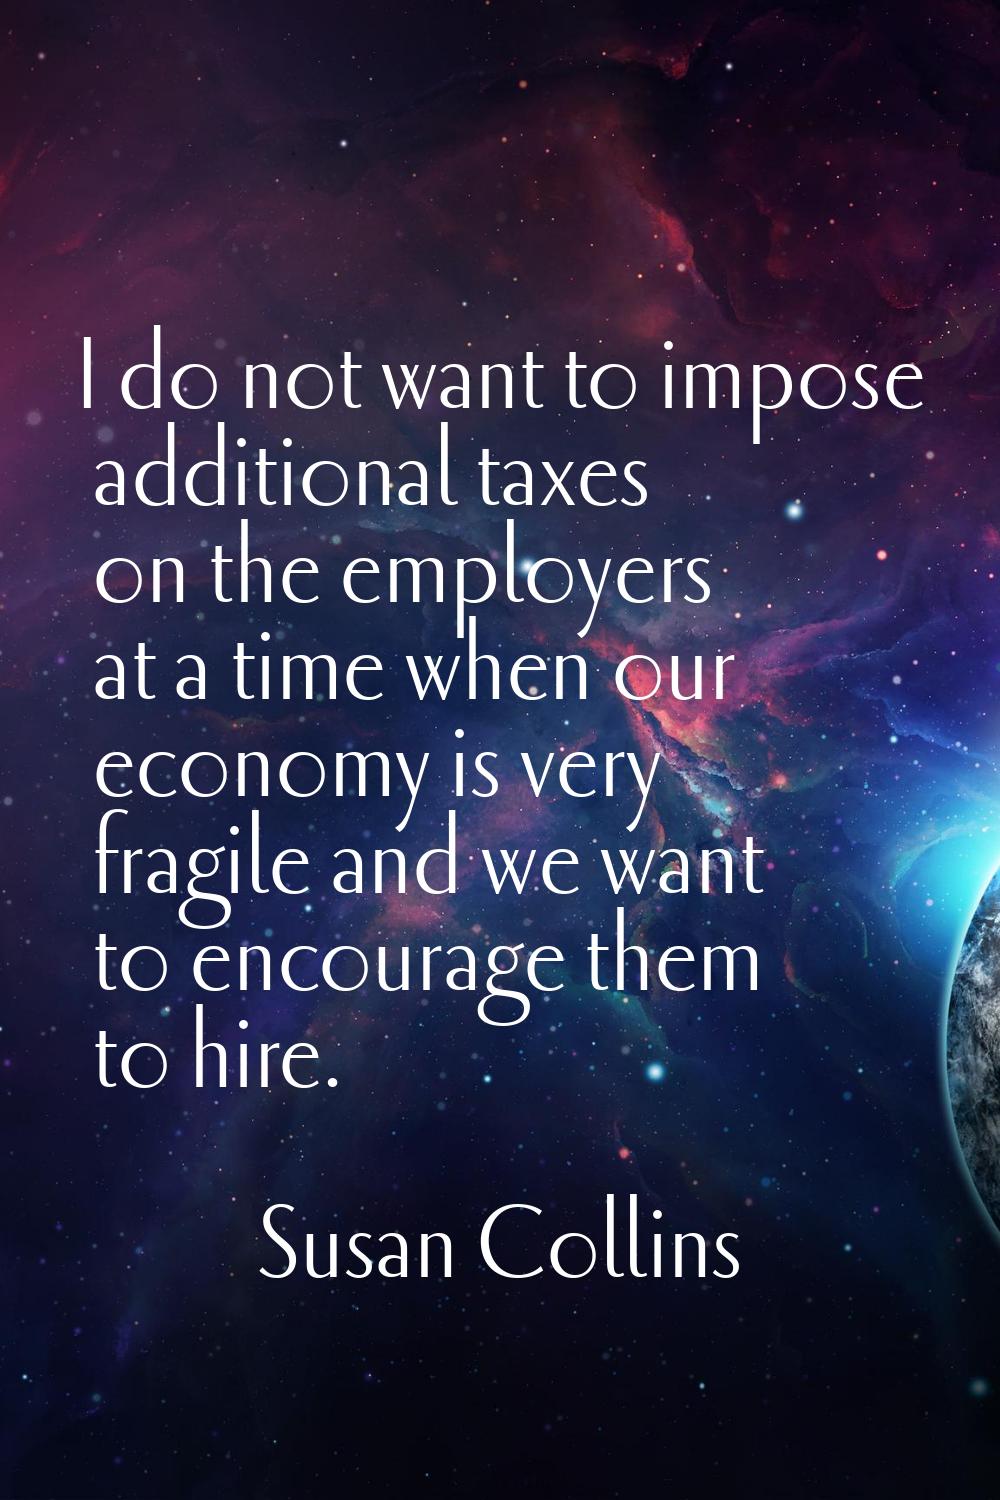 I do not want to impose additional taxes on the employers at a time when our economy is very fragil